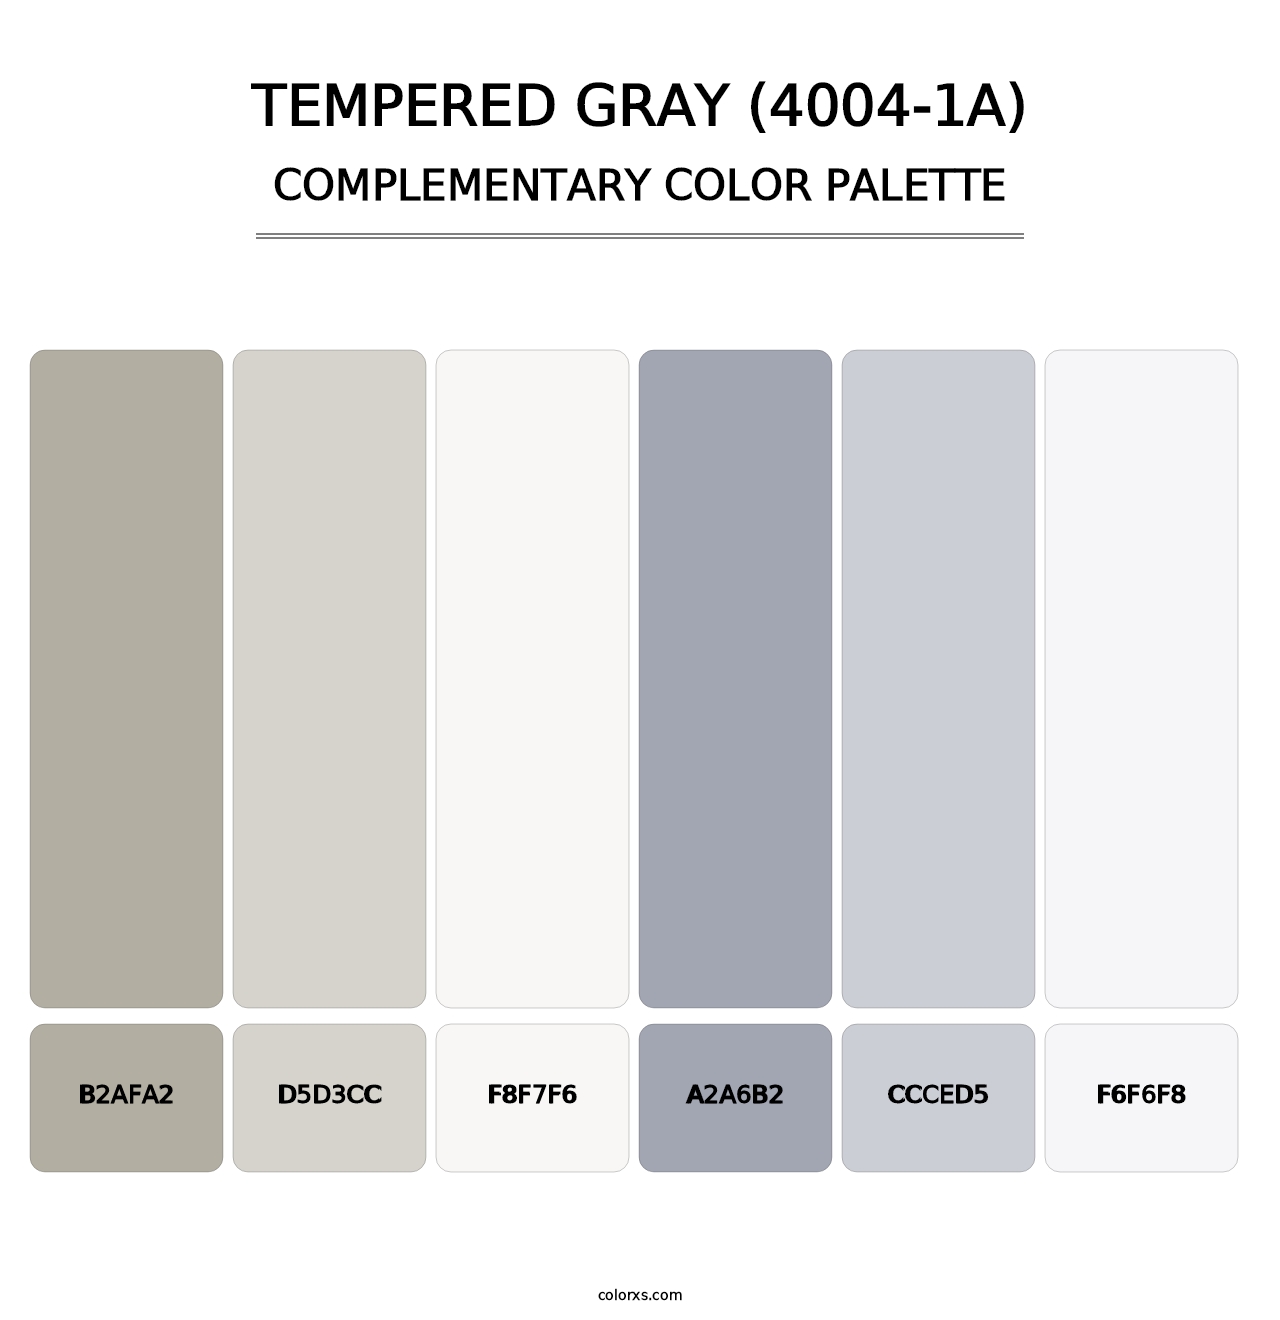 Tempered Gray (4004-1A) - Complementary Color Palette